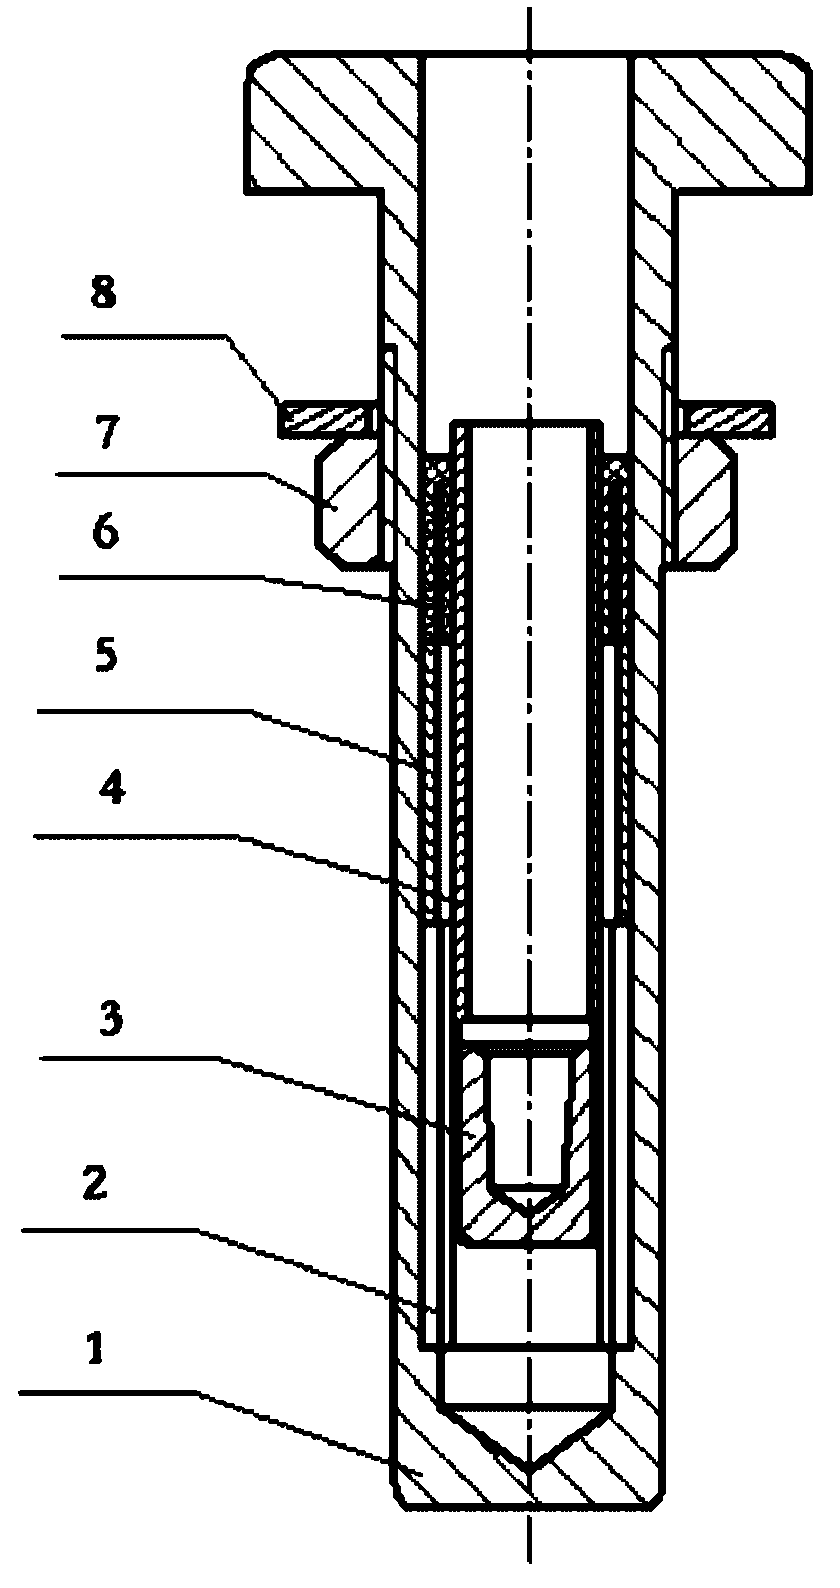 Clamping device for testing spindle bearing of spinning machine